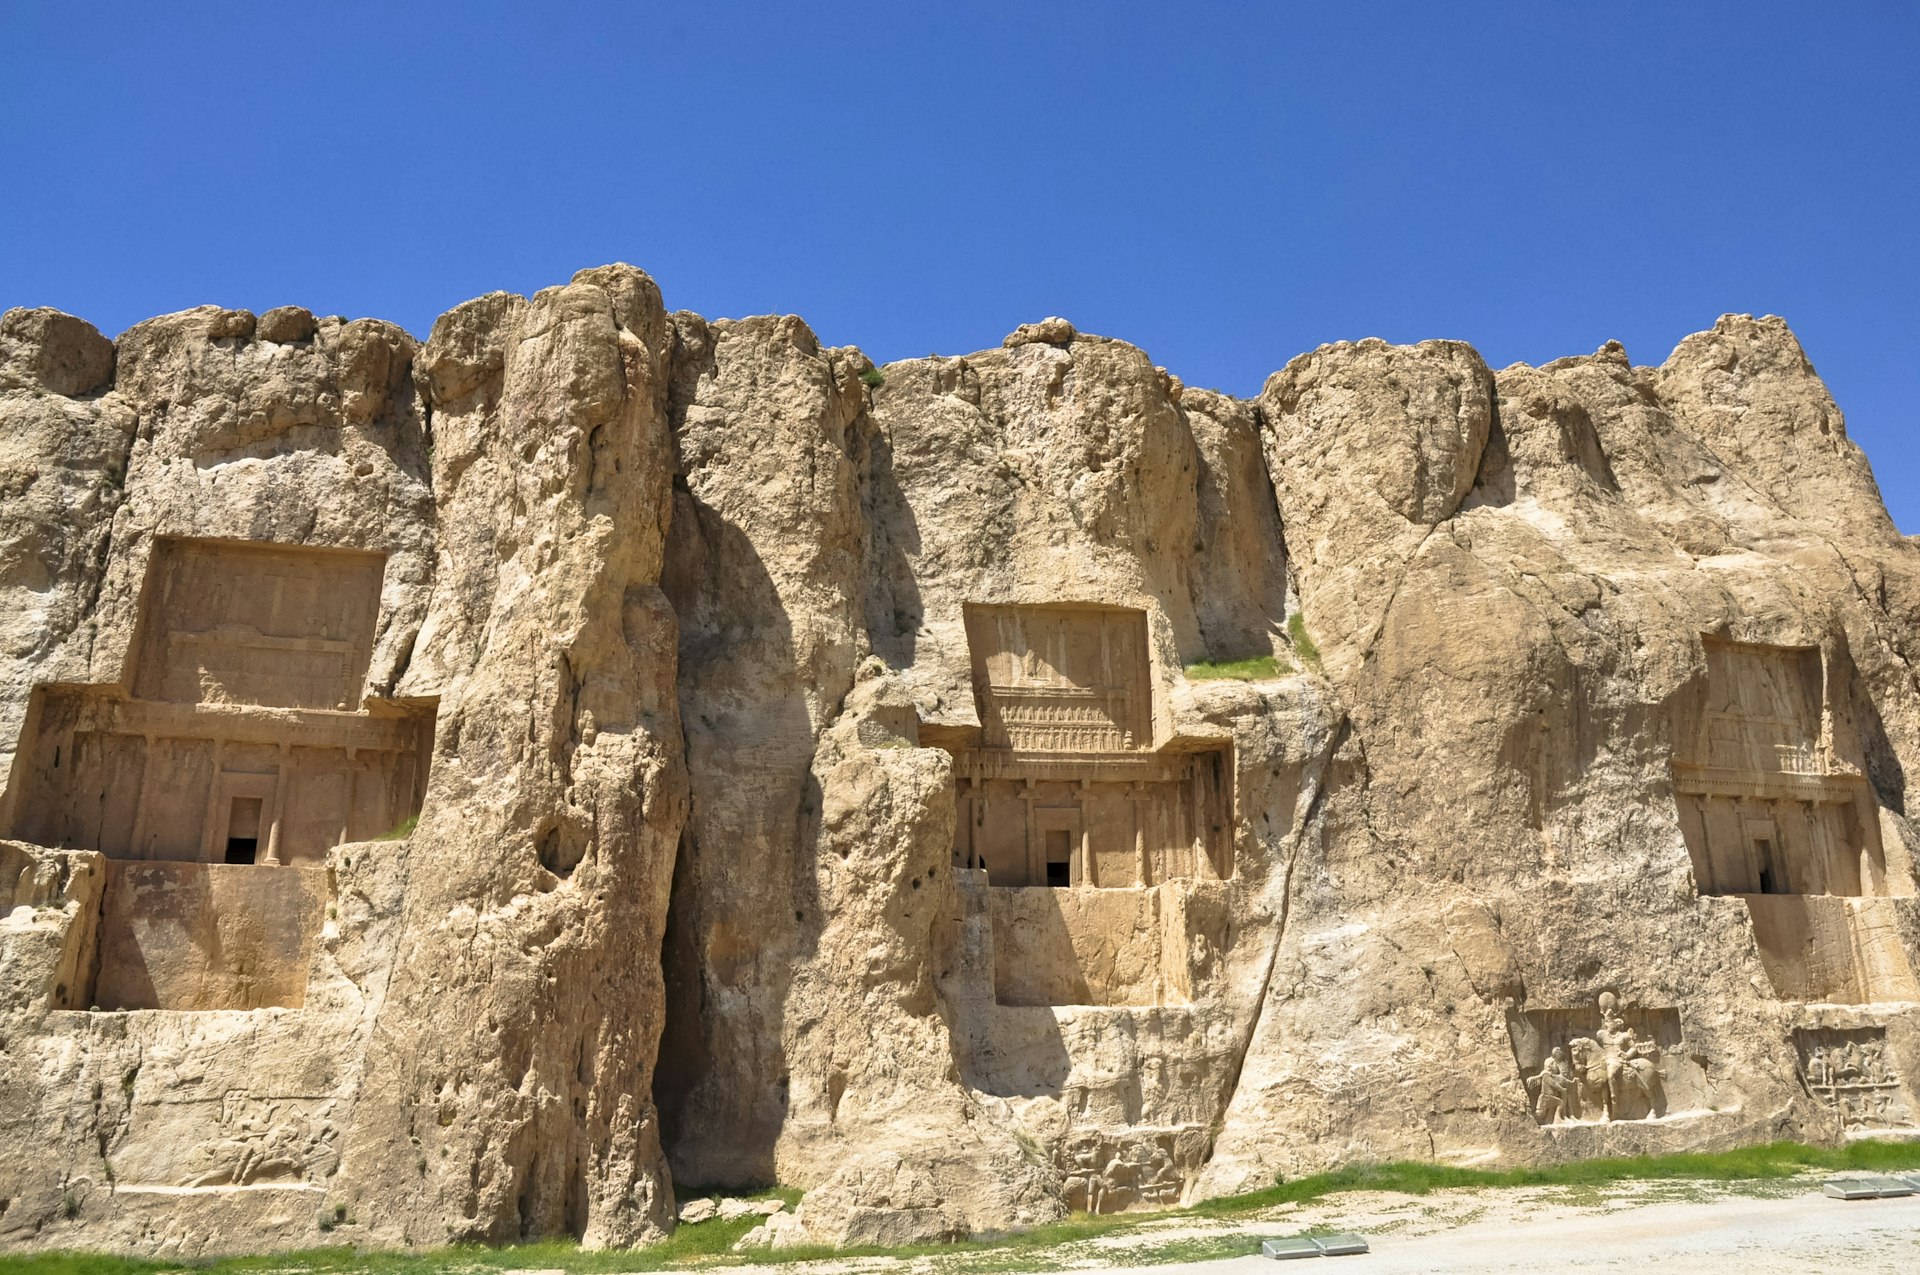 Naqsh-e Rostam rock tombs outside of Persepolis, Iran. Image by Claire Beyer / Lonely Planet